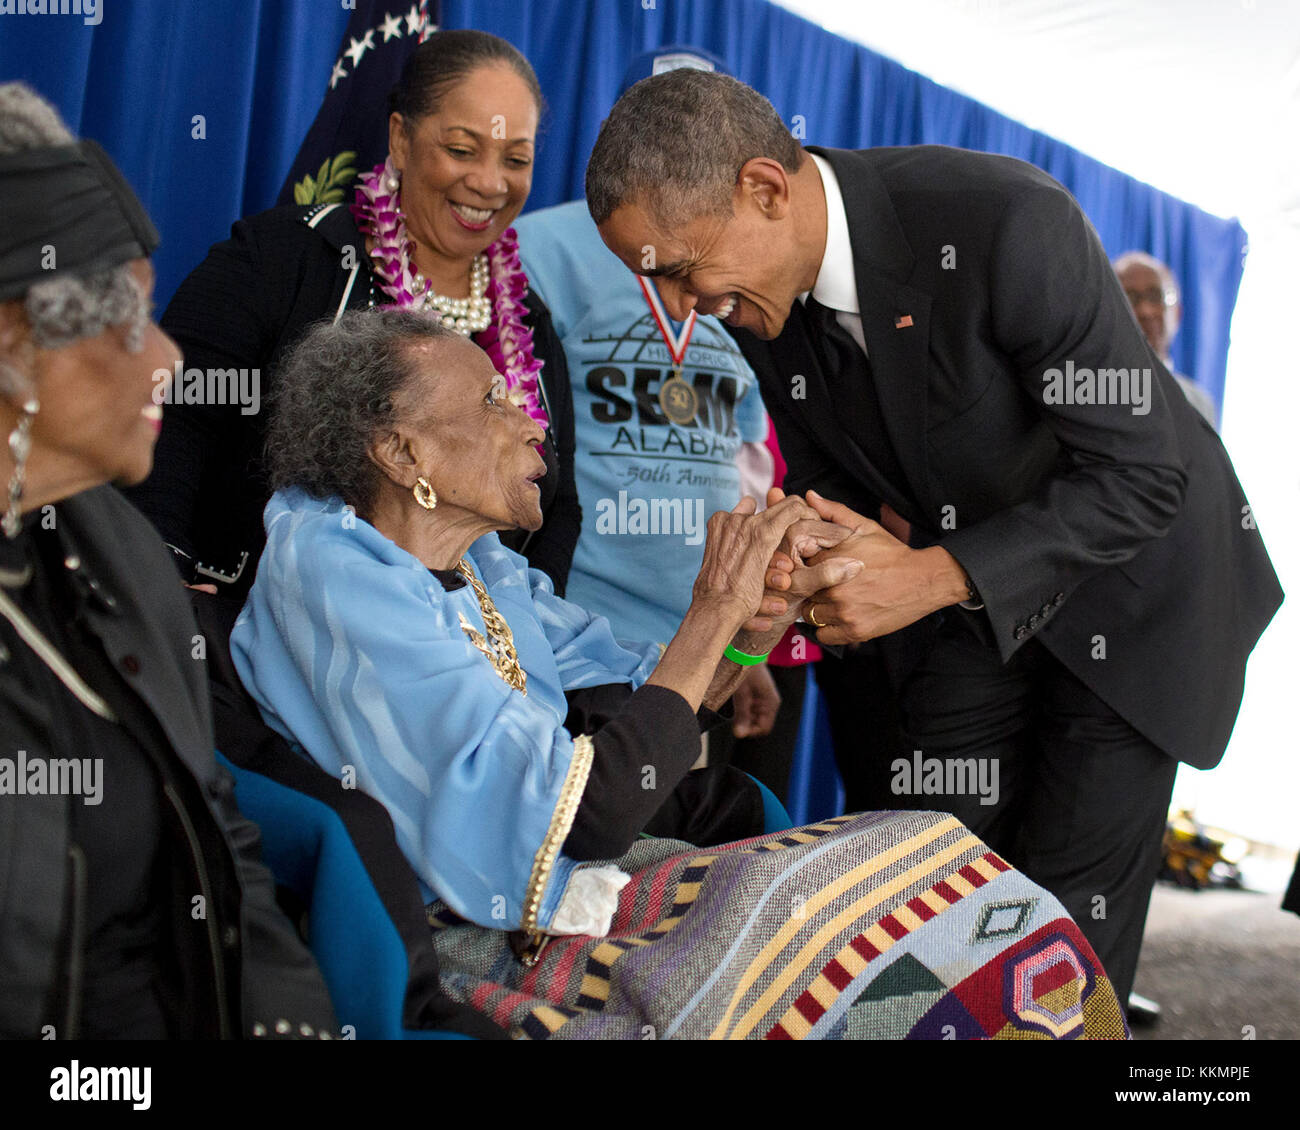 President Barack Obama greets former foot soldier Amelia Boynton Robinson, 103 years old, backstage before an event to commemorate the 50th Anniversary of Bloody Sunday and the Selma to Montgomery civil rights marches, at the Edmund Pettus Bridge in Selma, Ala., March 7, 2015. (Official White House Photo by Pete Souza)  This official White House photograph is being made available only for publication by news organizations and/or for personal use printing by the subject(s) of the photograph. The photograph may not be manipulated in any way and may not be used in commercial or political material Stock Photo